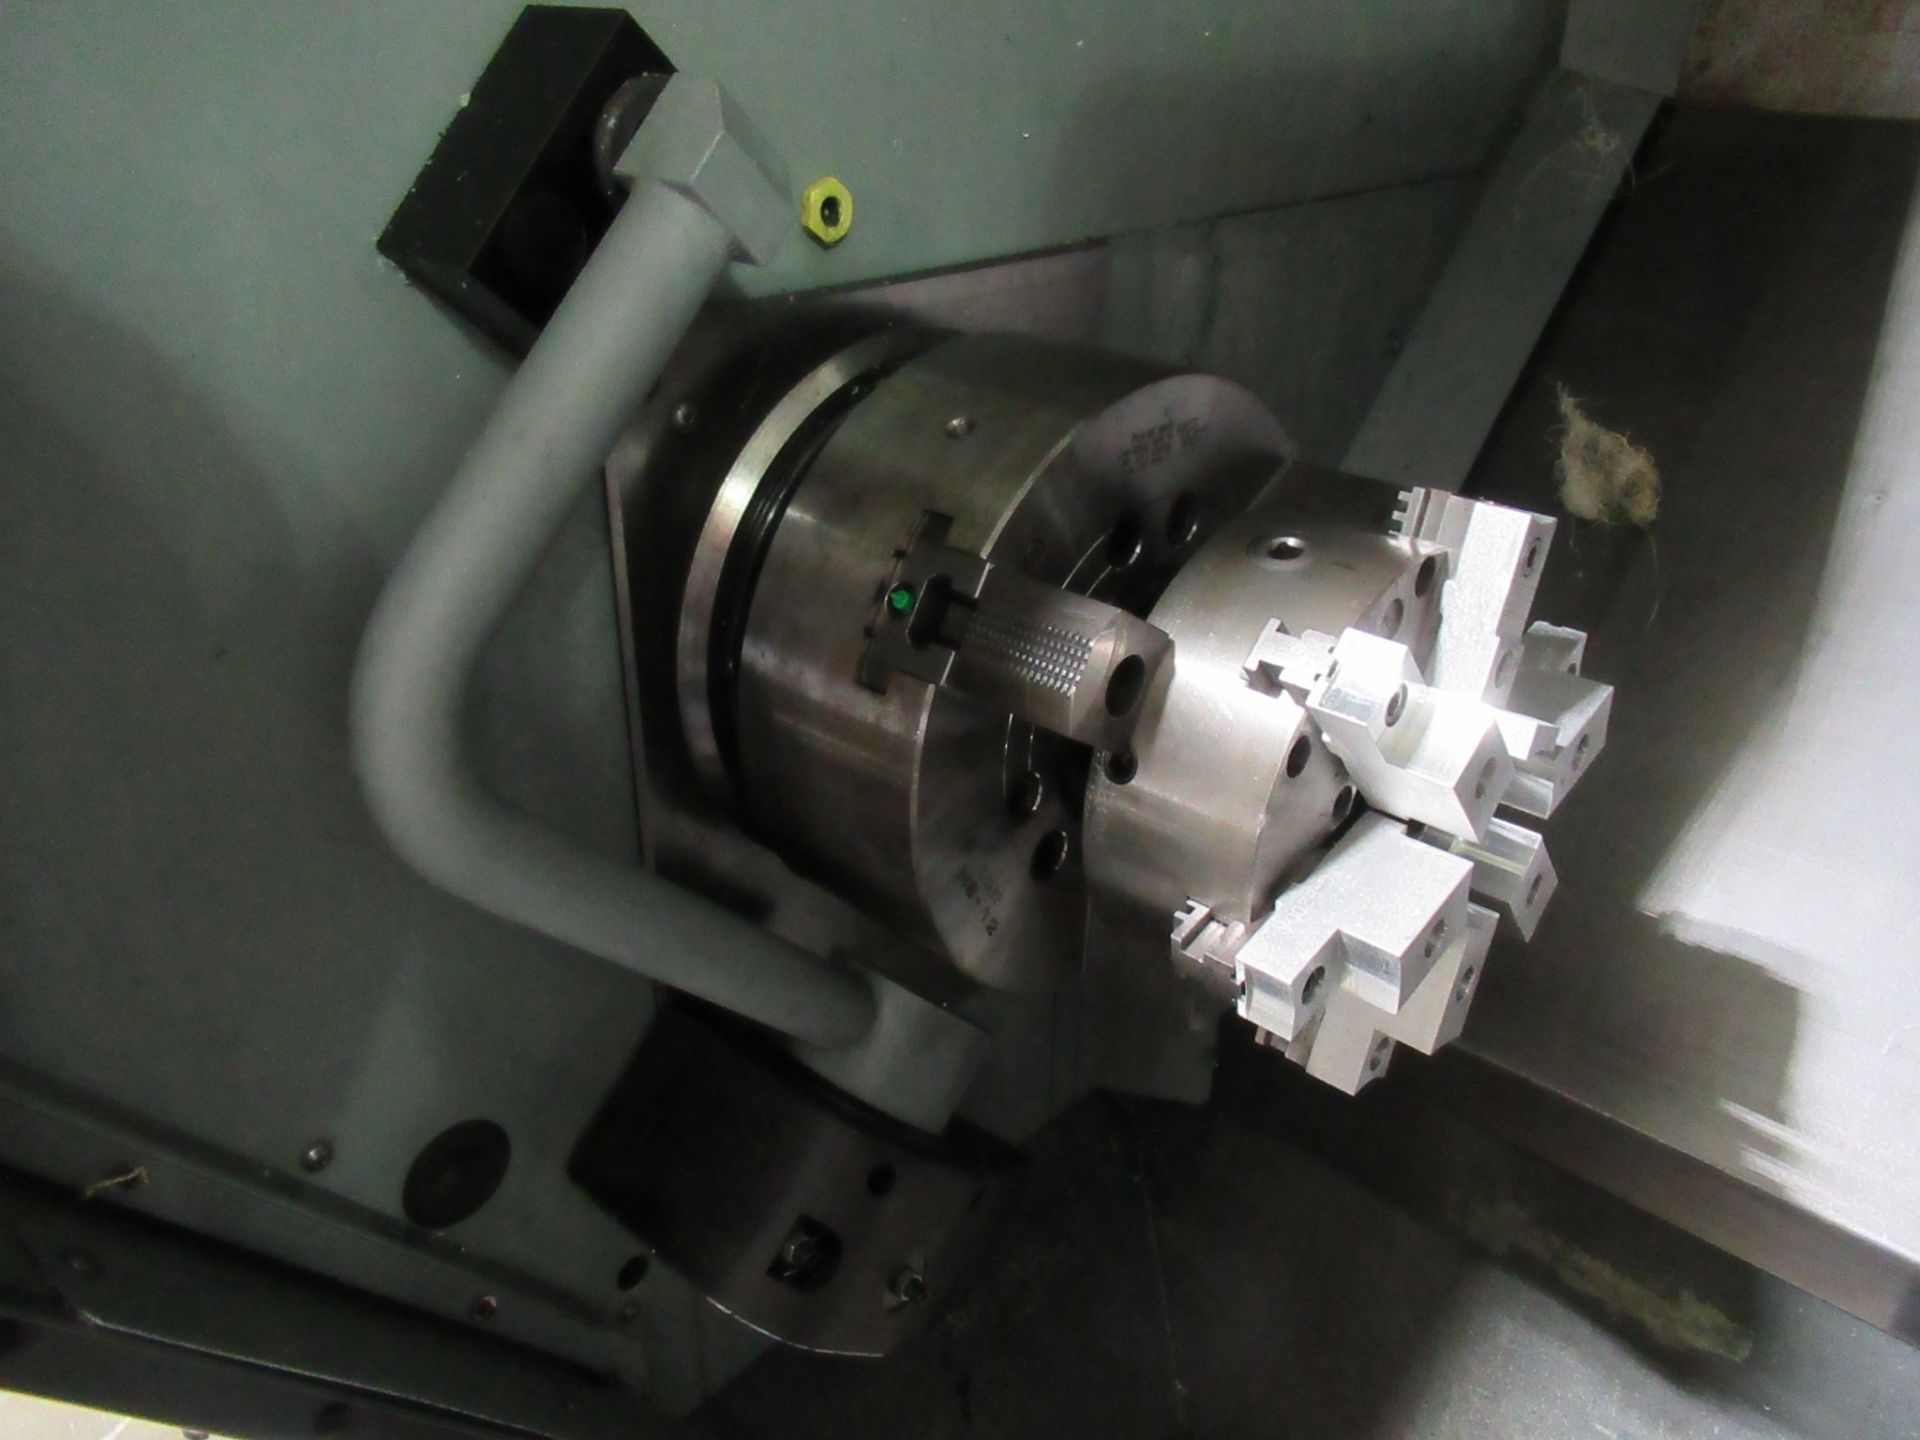 CNC LATHE, HAAS MDL. ST-30, new 2011, Haas CNC control, 31.75" max. swing, 21" max. cutting dia., - Image 4 of 7